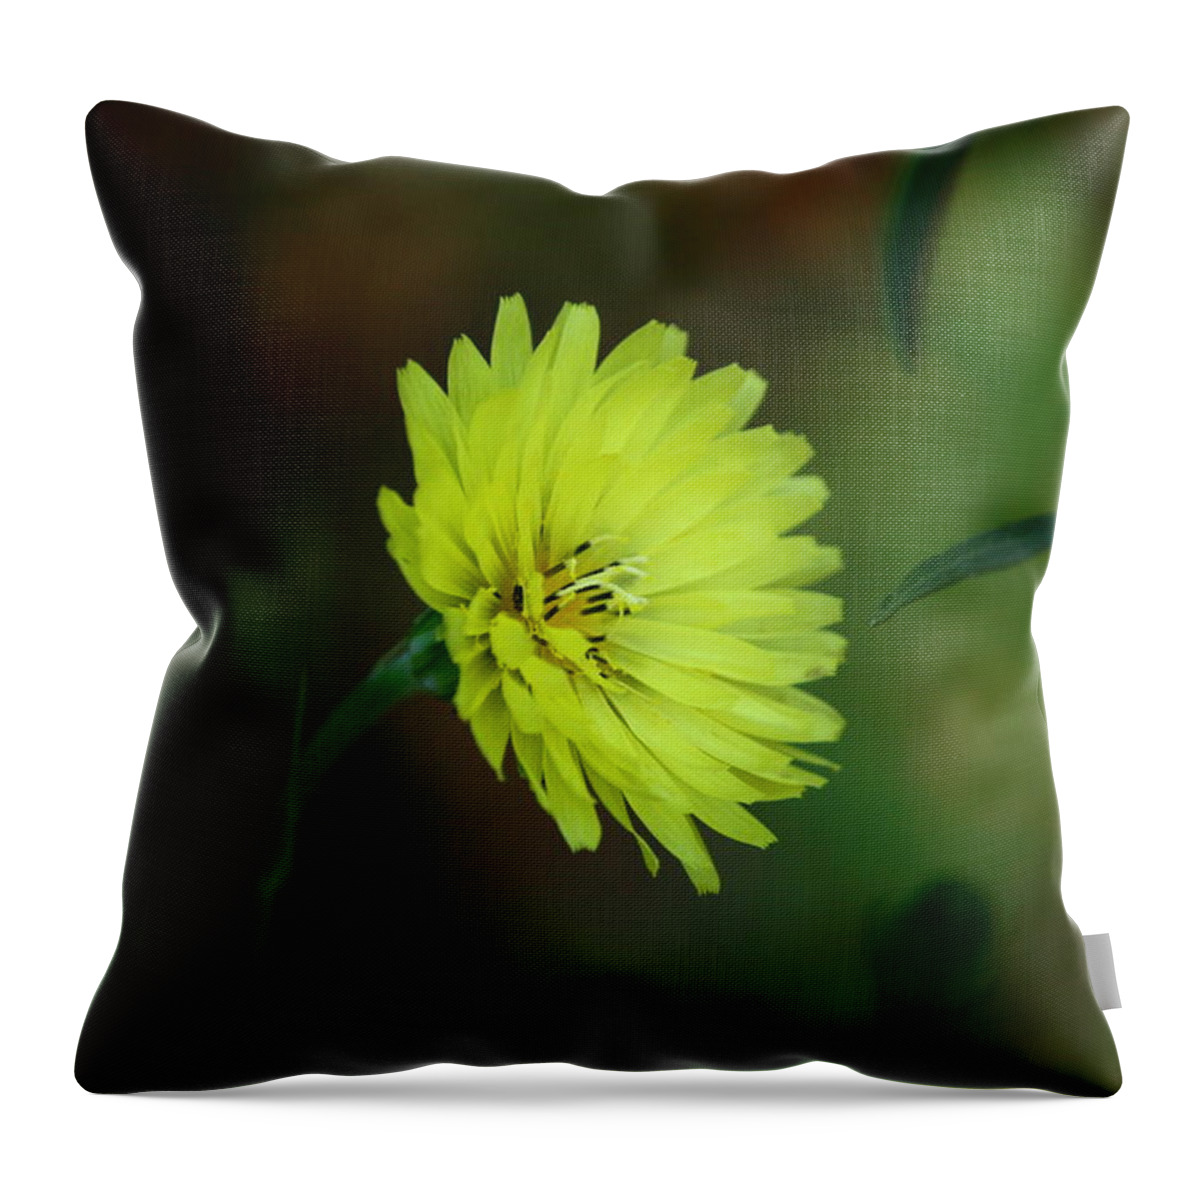 Yellow Throw Pillow featuring the photograph All By Myself by Cathy Harper